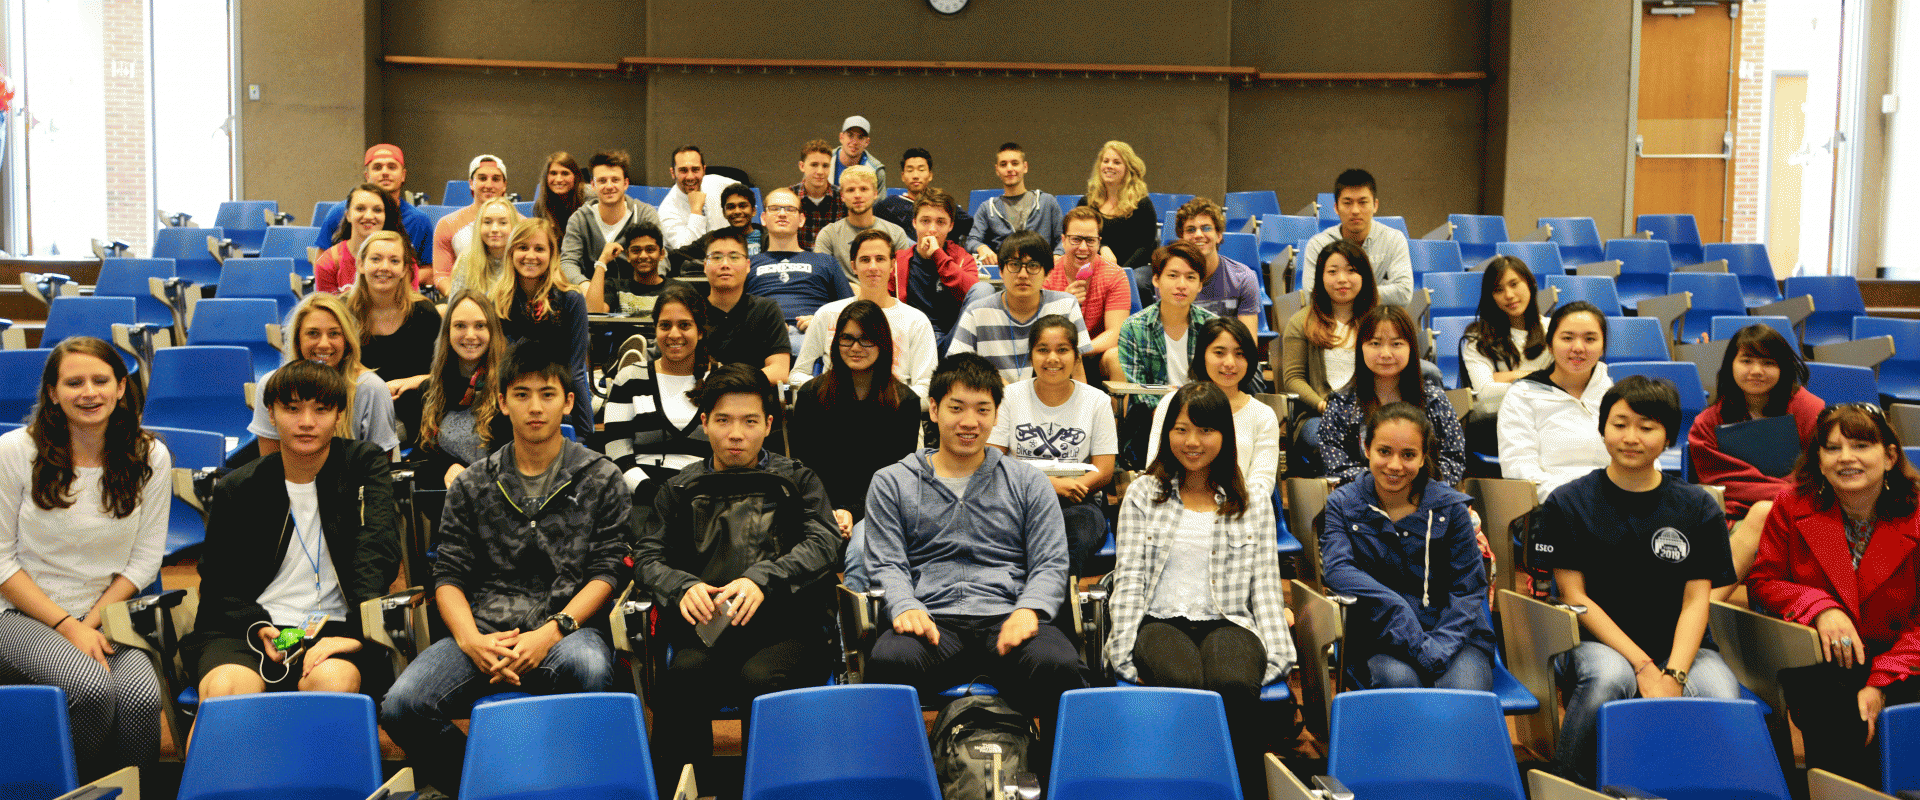 Group picture of Orientation students 